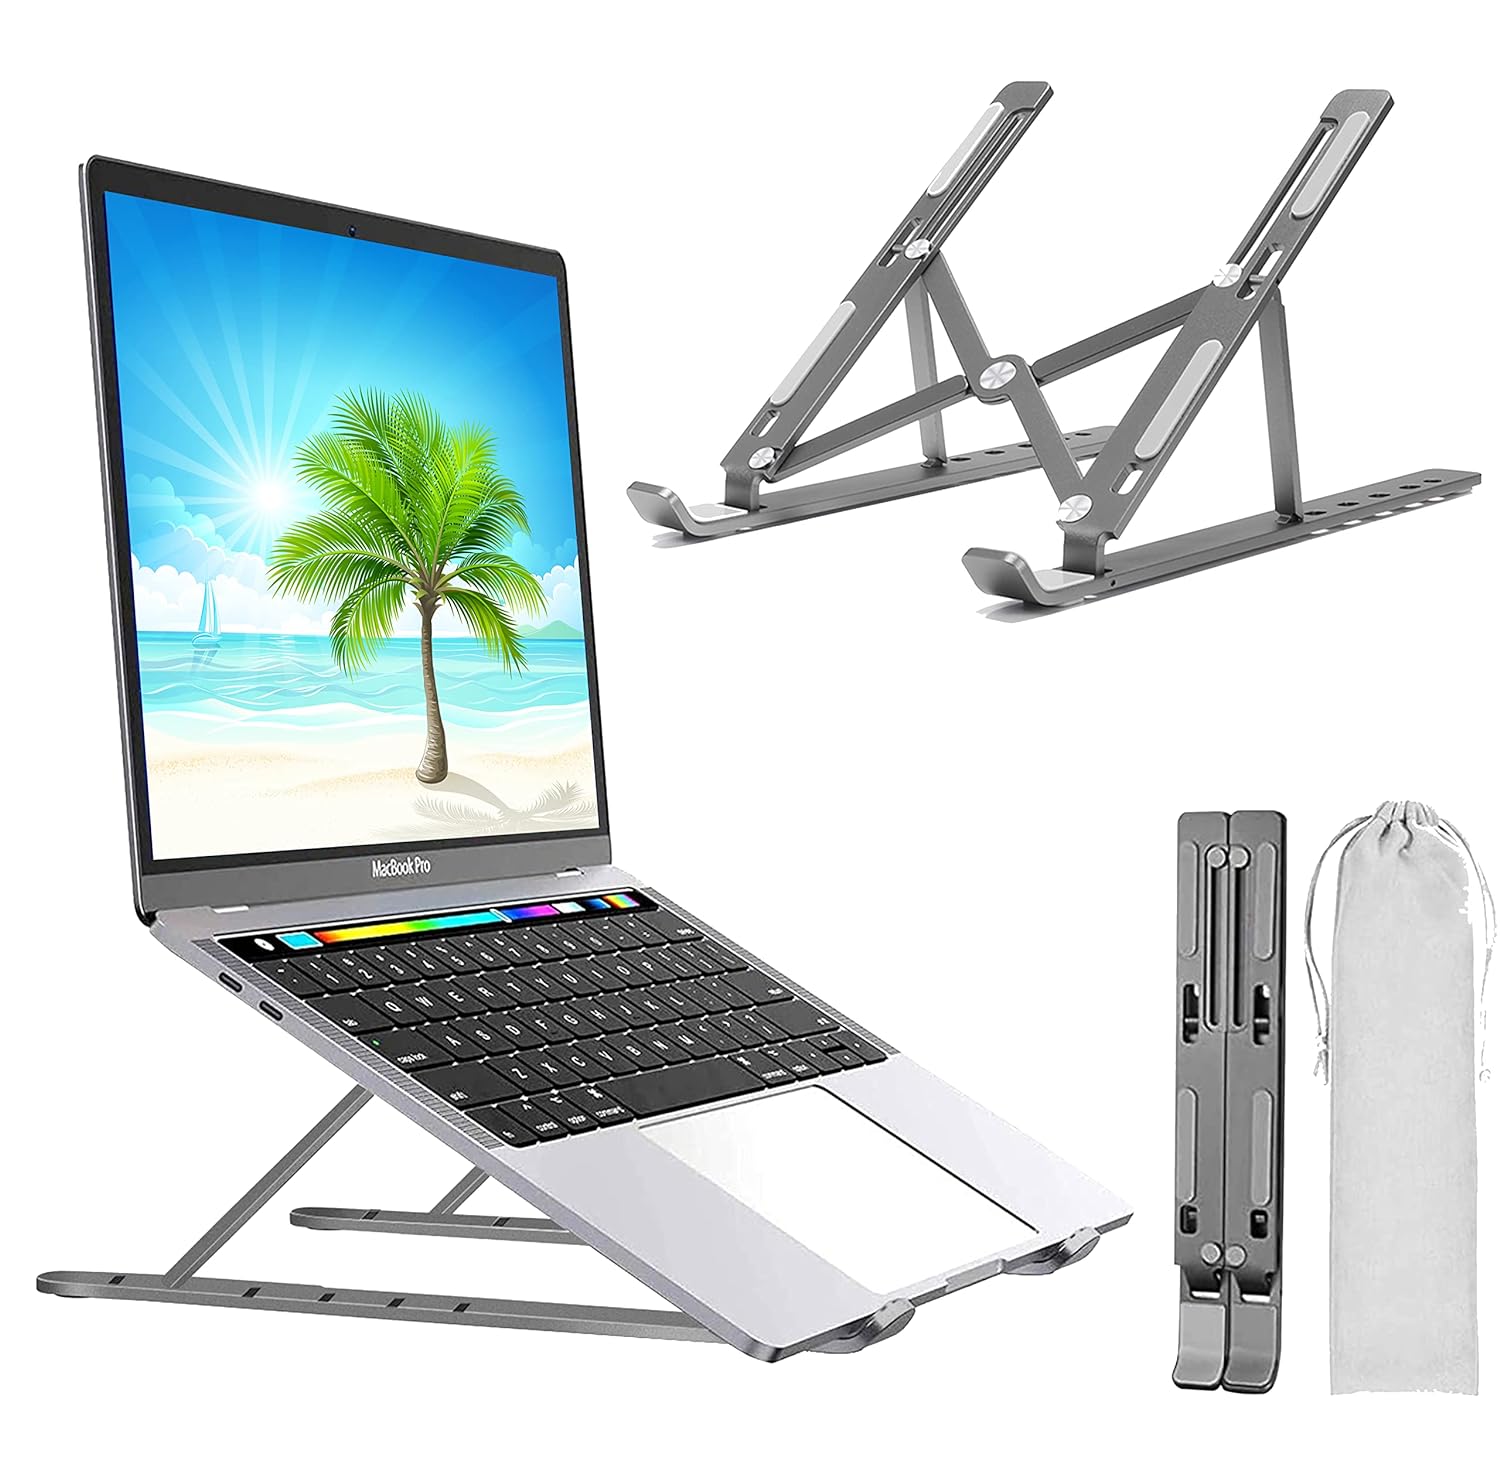 Laptop Stand for Desk, Laptop Riser,Aluminum Alloy Laptop Holder Compatible with 10-15.6 Inch MacBook PC-Notebook Tablet…